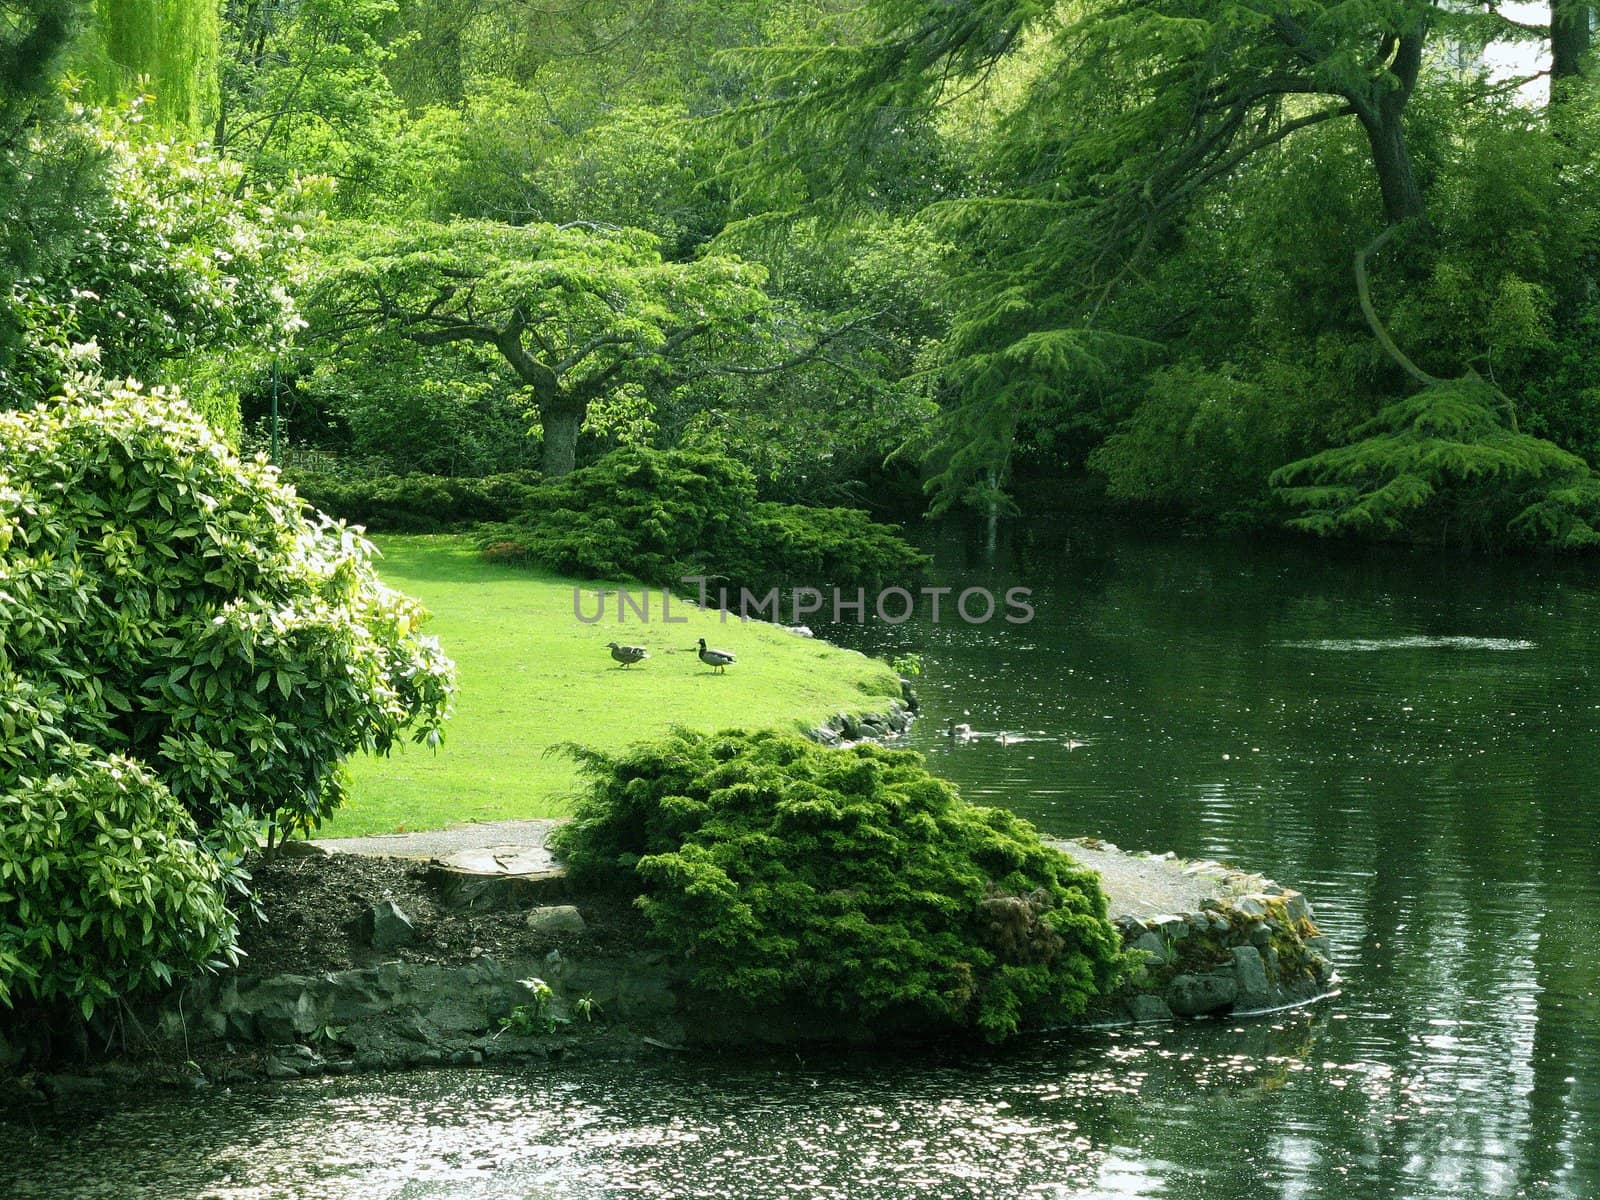 A lush green park with trees and a pond